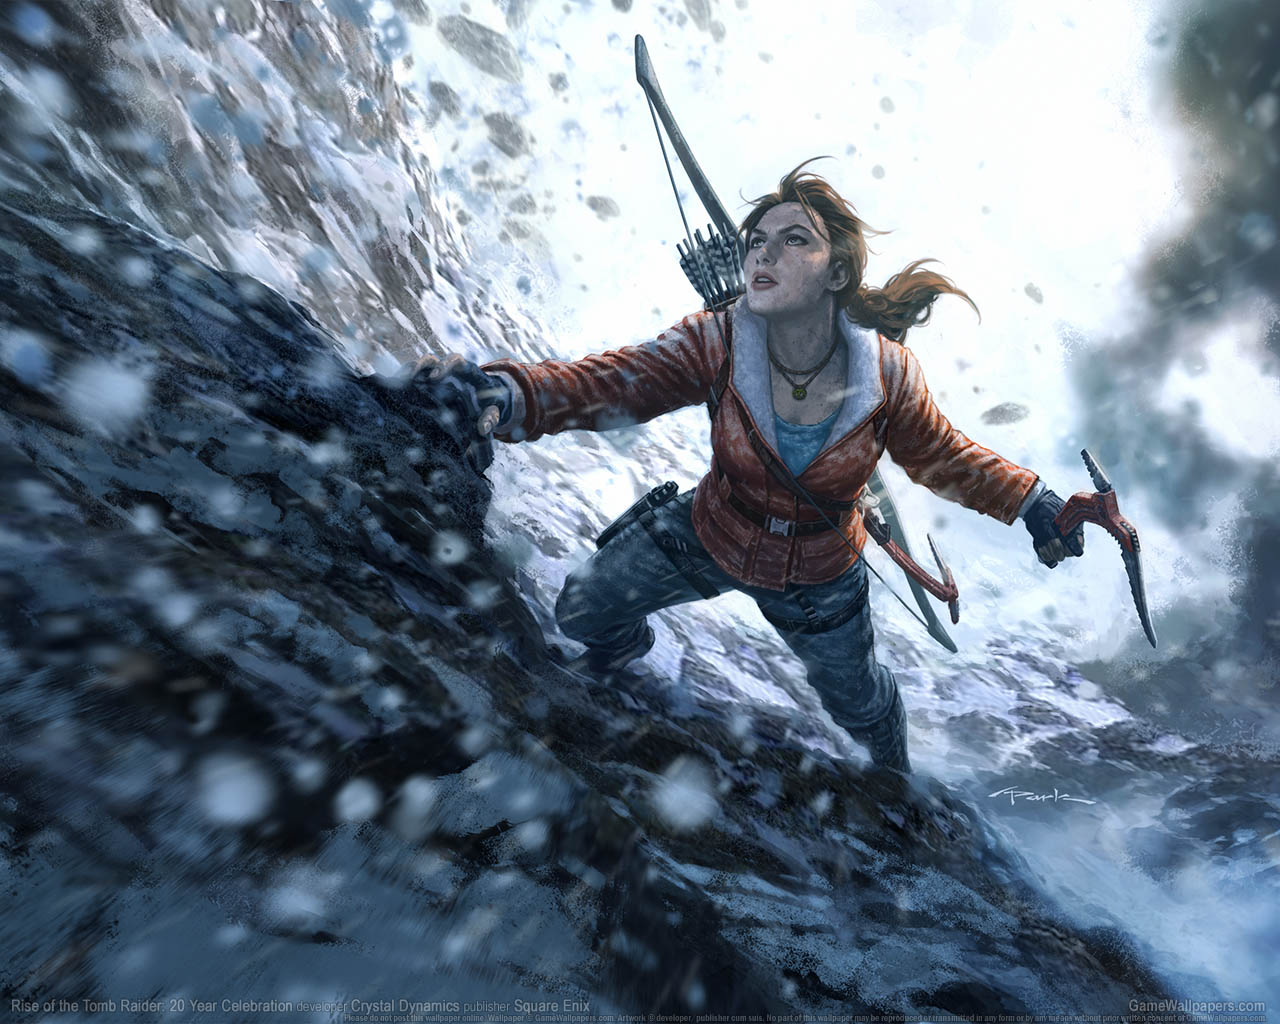 Rise of the Tomb Raider%3A 20 Year Celebration wallpaper 02 1280x1024